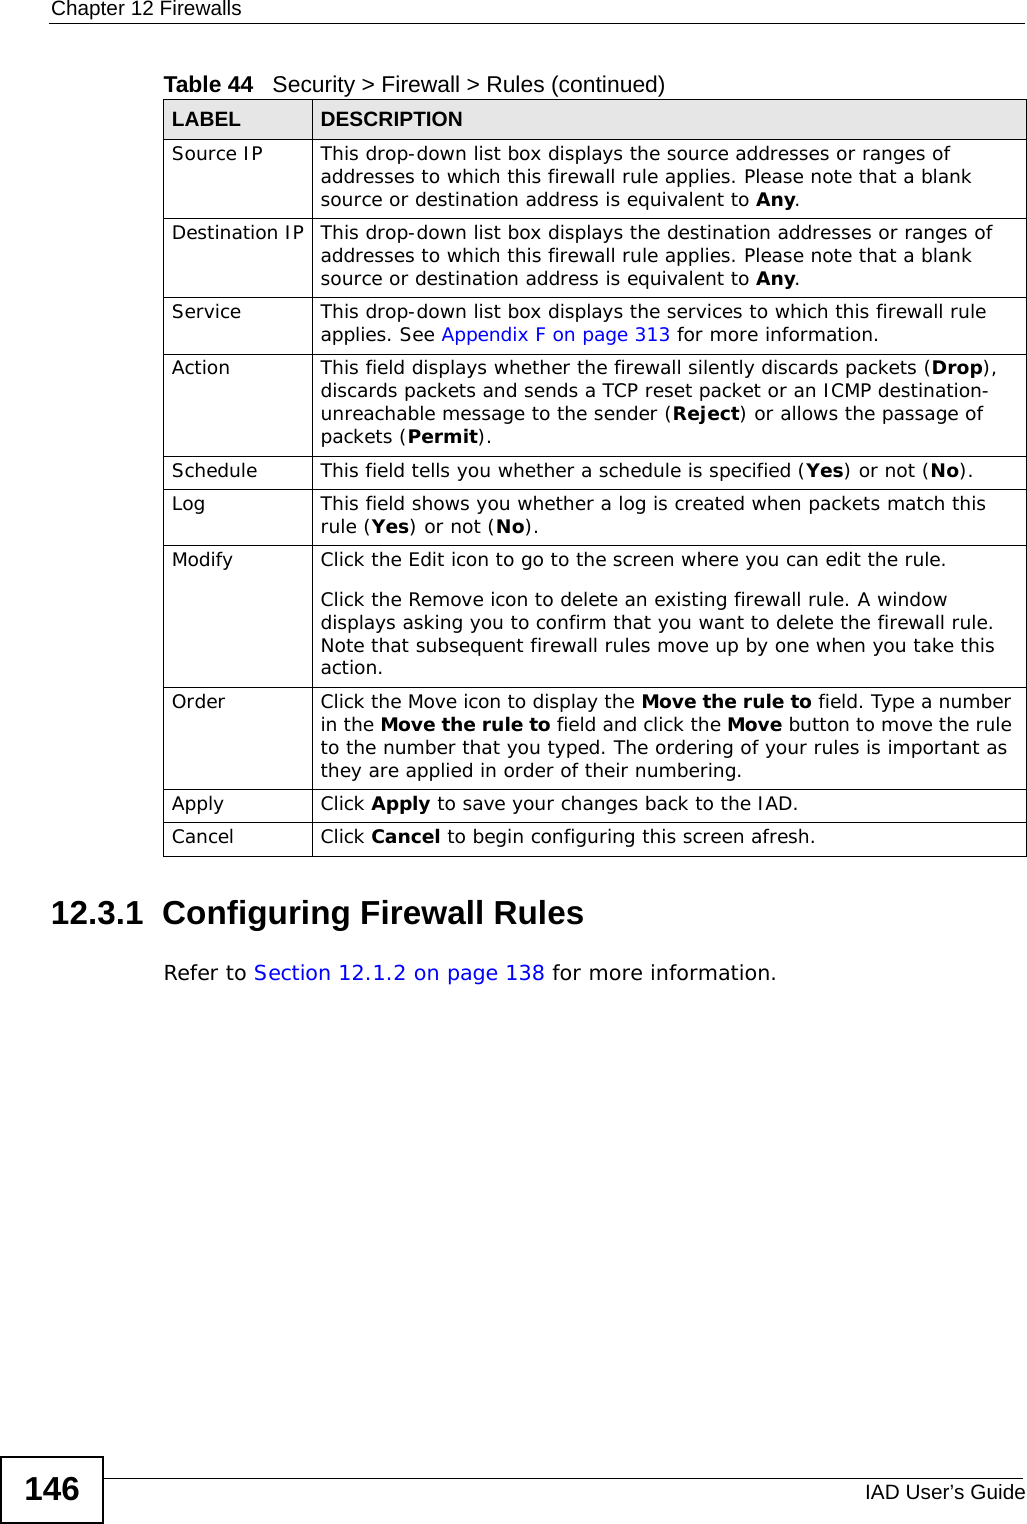 Chapter 12 FirewallsIAD User’s Guide14612.3.1  Configuring Firewall Rules   Refer to Section 12.1.2 on page 138 for more information. Source IP This drop-down list box displays the source addresses or ranges of addresses to which this firewall rule applies. Please note that a blank source or destination address is equivalent to Any.Destination IP This drop-down list box displays the destination addresses or ranges of addresses to which this firewall rule applies. Please note that a blank source or destination address is equivalent to Any.Service  This drop-down list box displays the services to which this firewall rule applies. See Appendix F on page 313 for more information.Action This field displays whether the firewall silently discards packets (Drop), discards packets and sends a TCP reset packet or an ICMP destination-unreachable message to the sender (Reject) or allows the passage of packets (Permit).Schedule This field tells you whether a schedule is specified (Yes) or not (No).Log This field shows you whether a log is created when packets match this rule (Yes) or not (No).Modify Click the Edit icon to go to the screen where you can edit the rule.Click the Remove icon to delete an existing firewall rule. A window displays asking you to confirm that you want to delete the firewall rule. Note that subsequent firewall rules move up by one when you take this action.Order Click the Move icon to display the Move the rule to field. Type a number in the Move the rule to field and click the Move button to move the rule to the number that you typed. The ordering of your rules is important as they are applied in order of their numbering.Apply Click Apply to save your changes back to the IAD.Cancel Click Cancel to begin configuring this screen afresh.Table 44   Security &gt; Firewall &gt; Rules (continued)LABEL DESCRIPTION